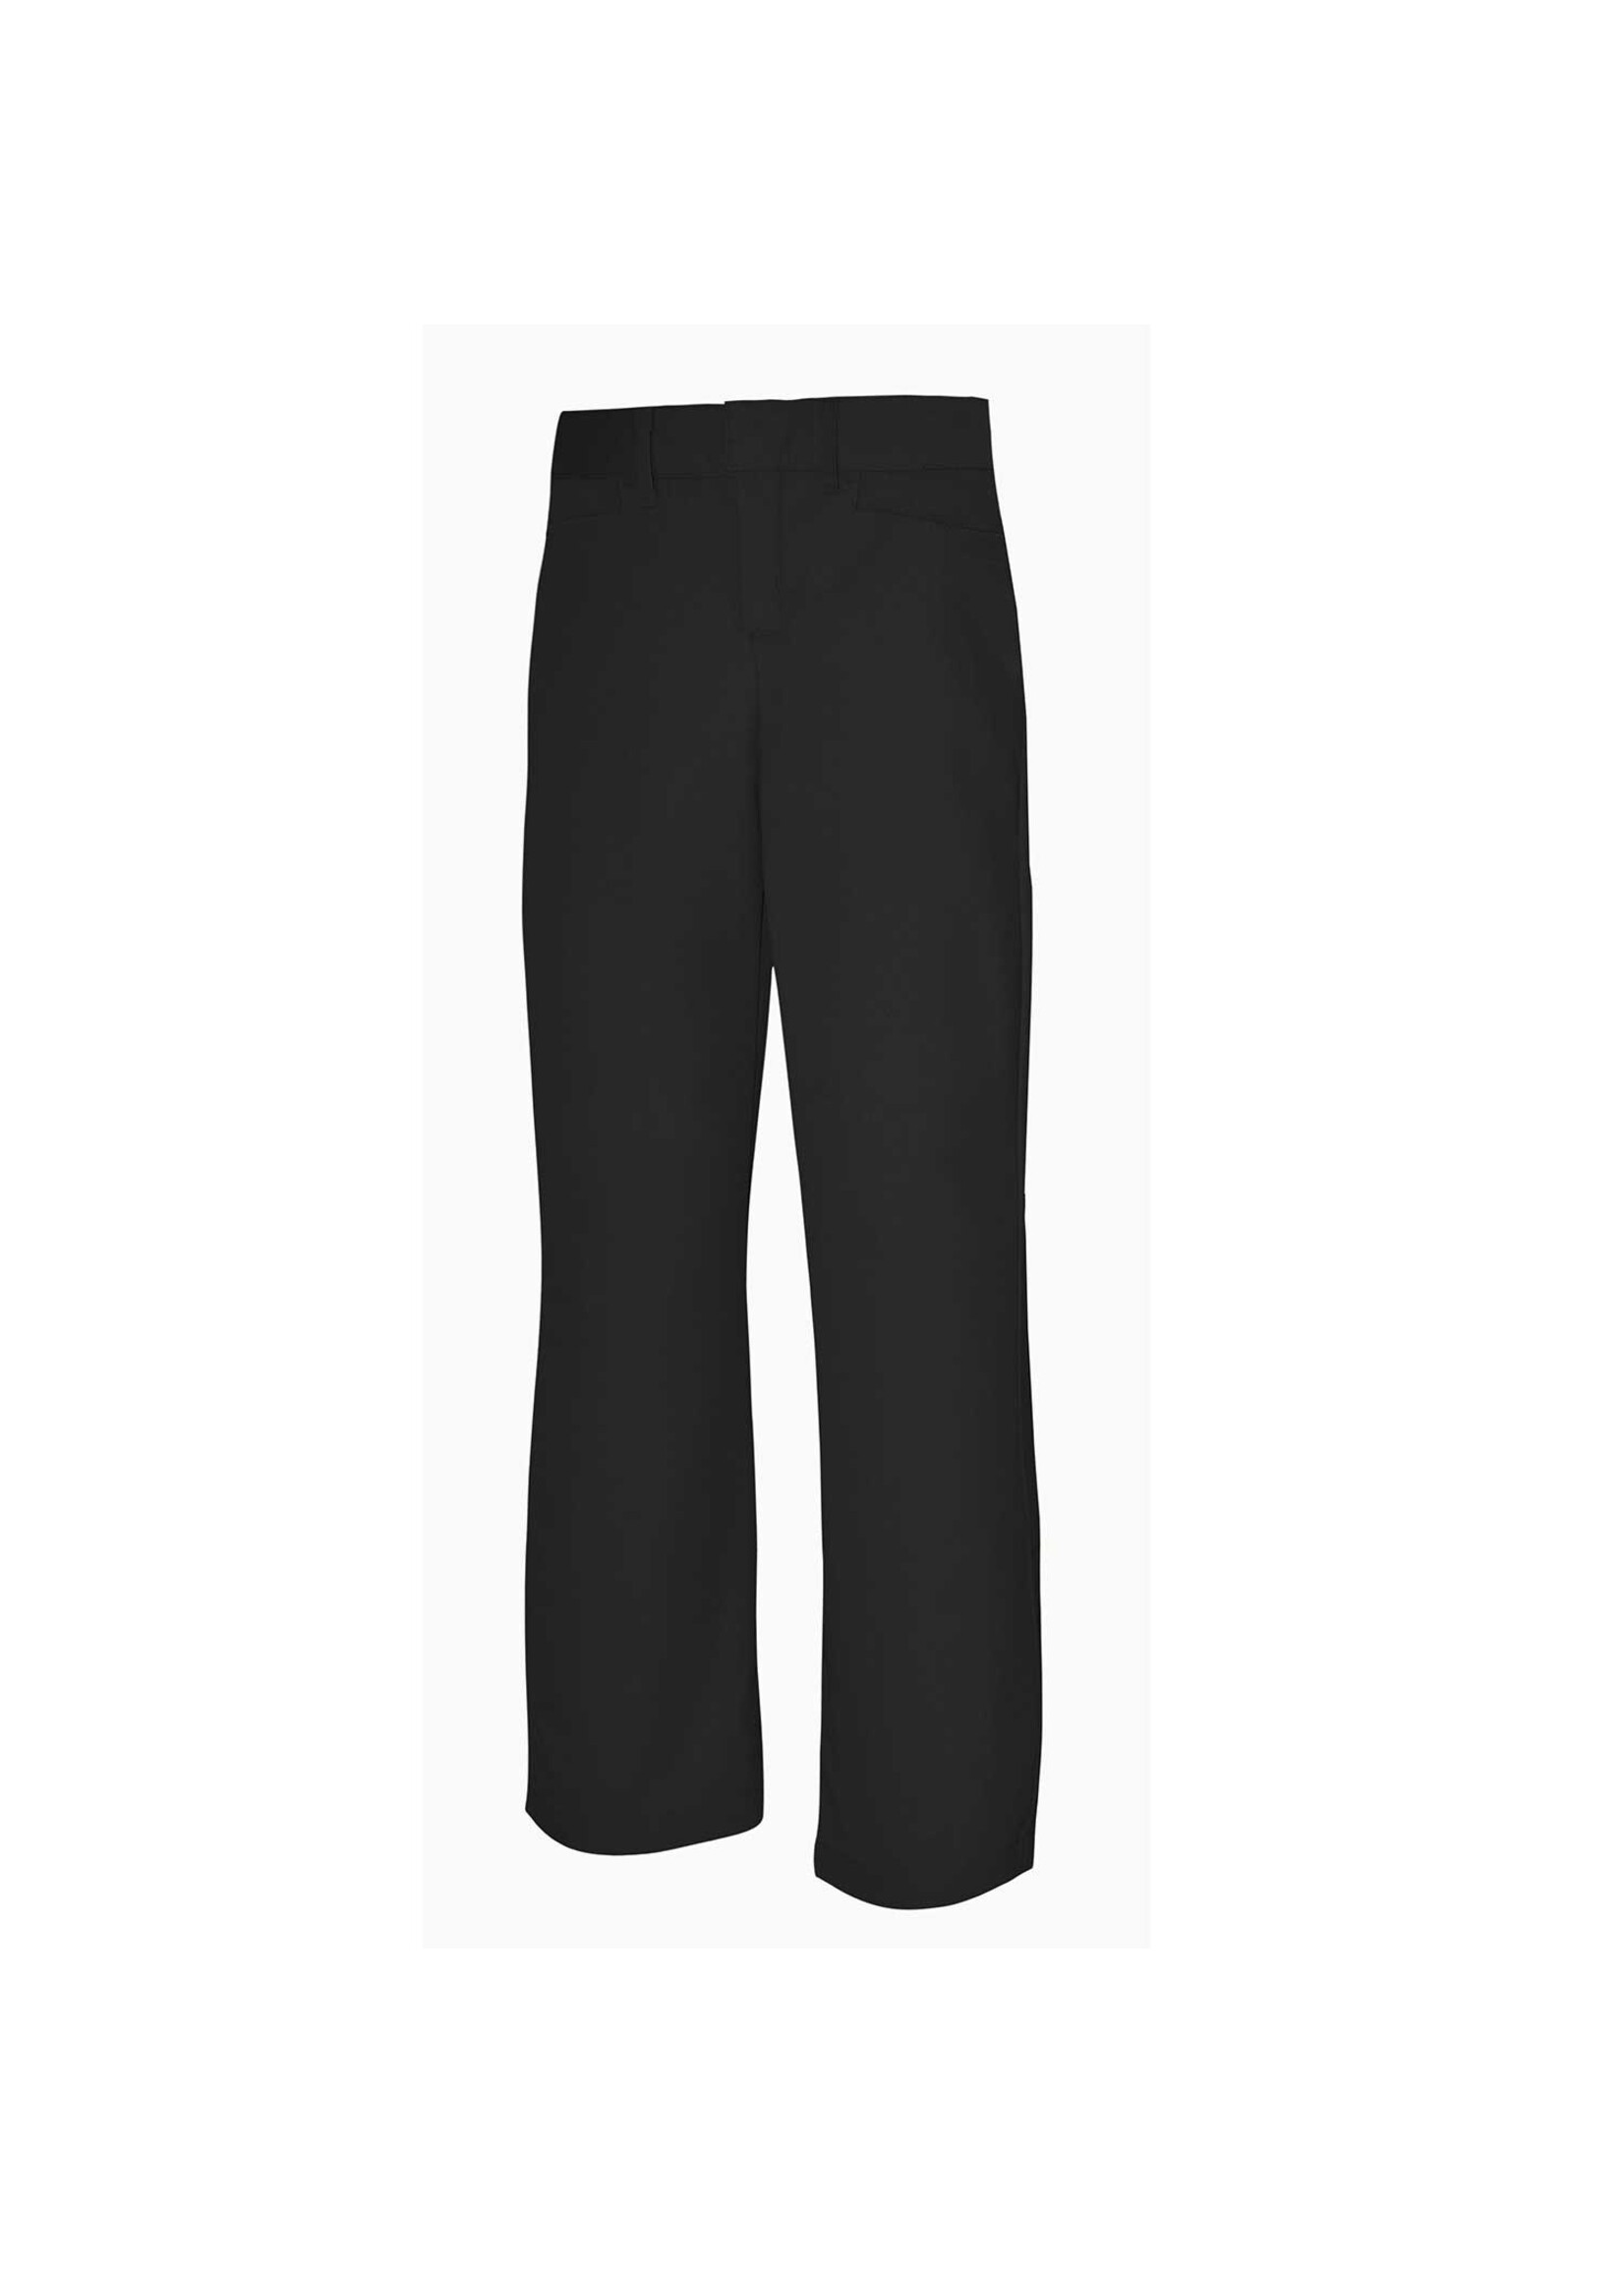 Buy Arrow Mid Rise Flat Front Striped Formal Trousers - NNNOW.com